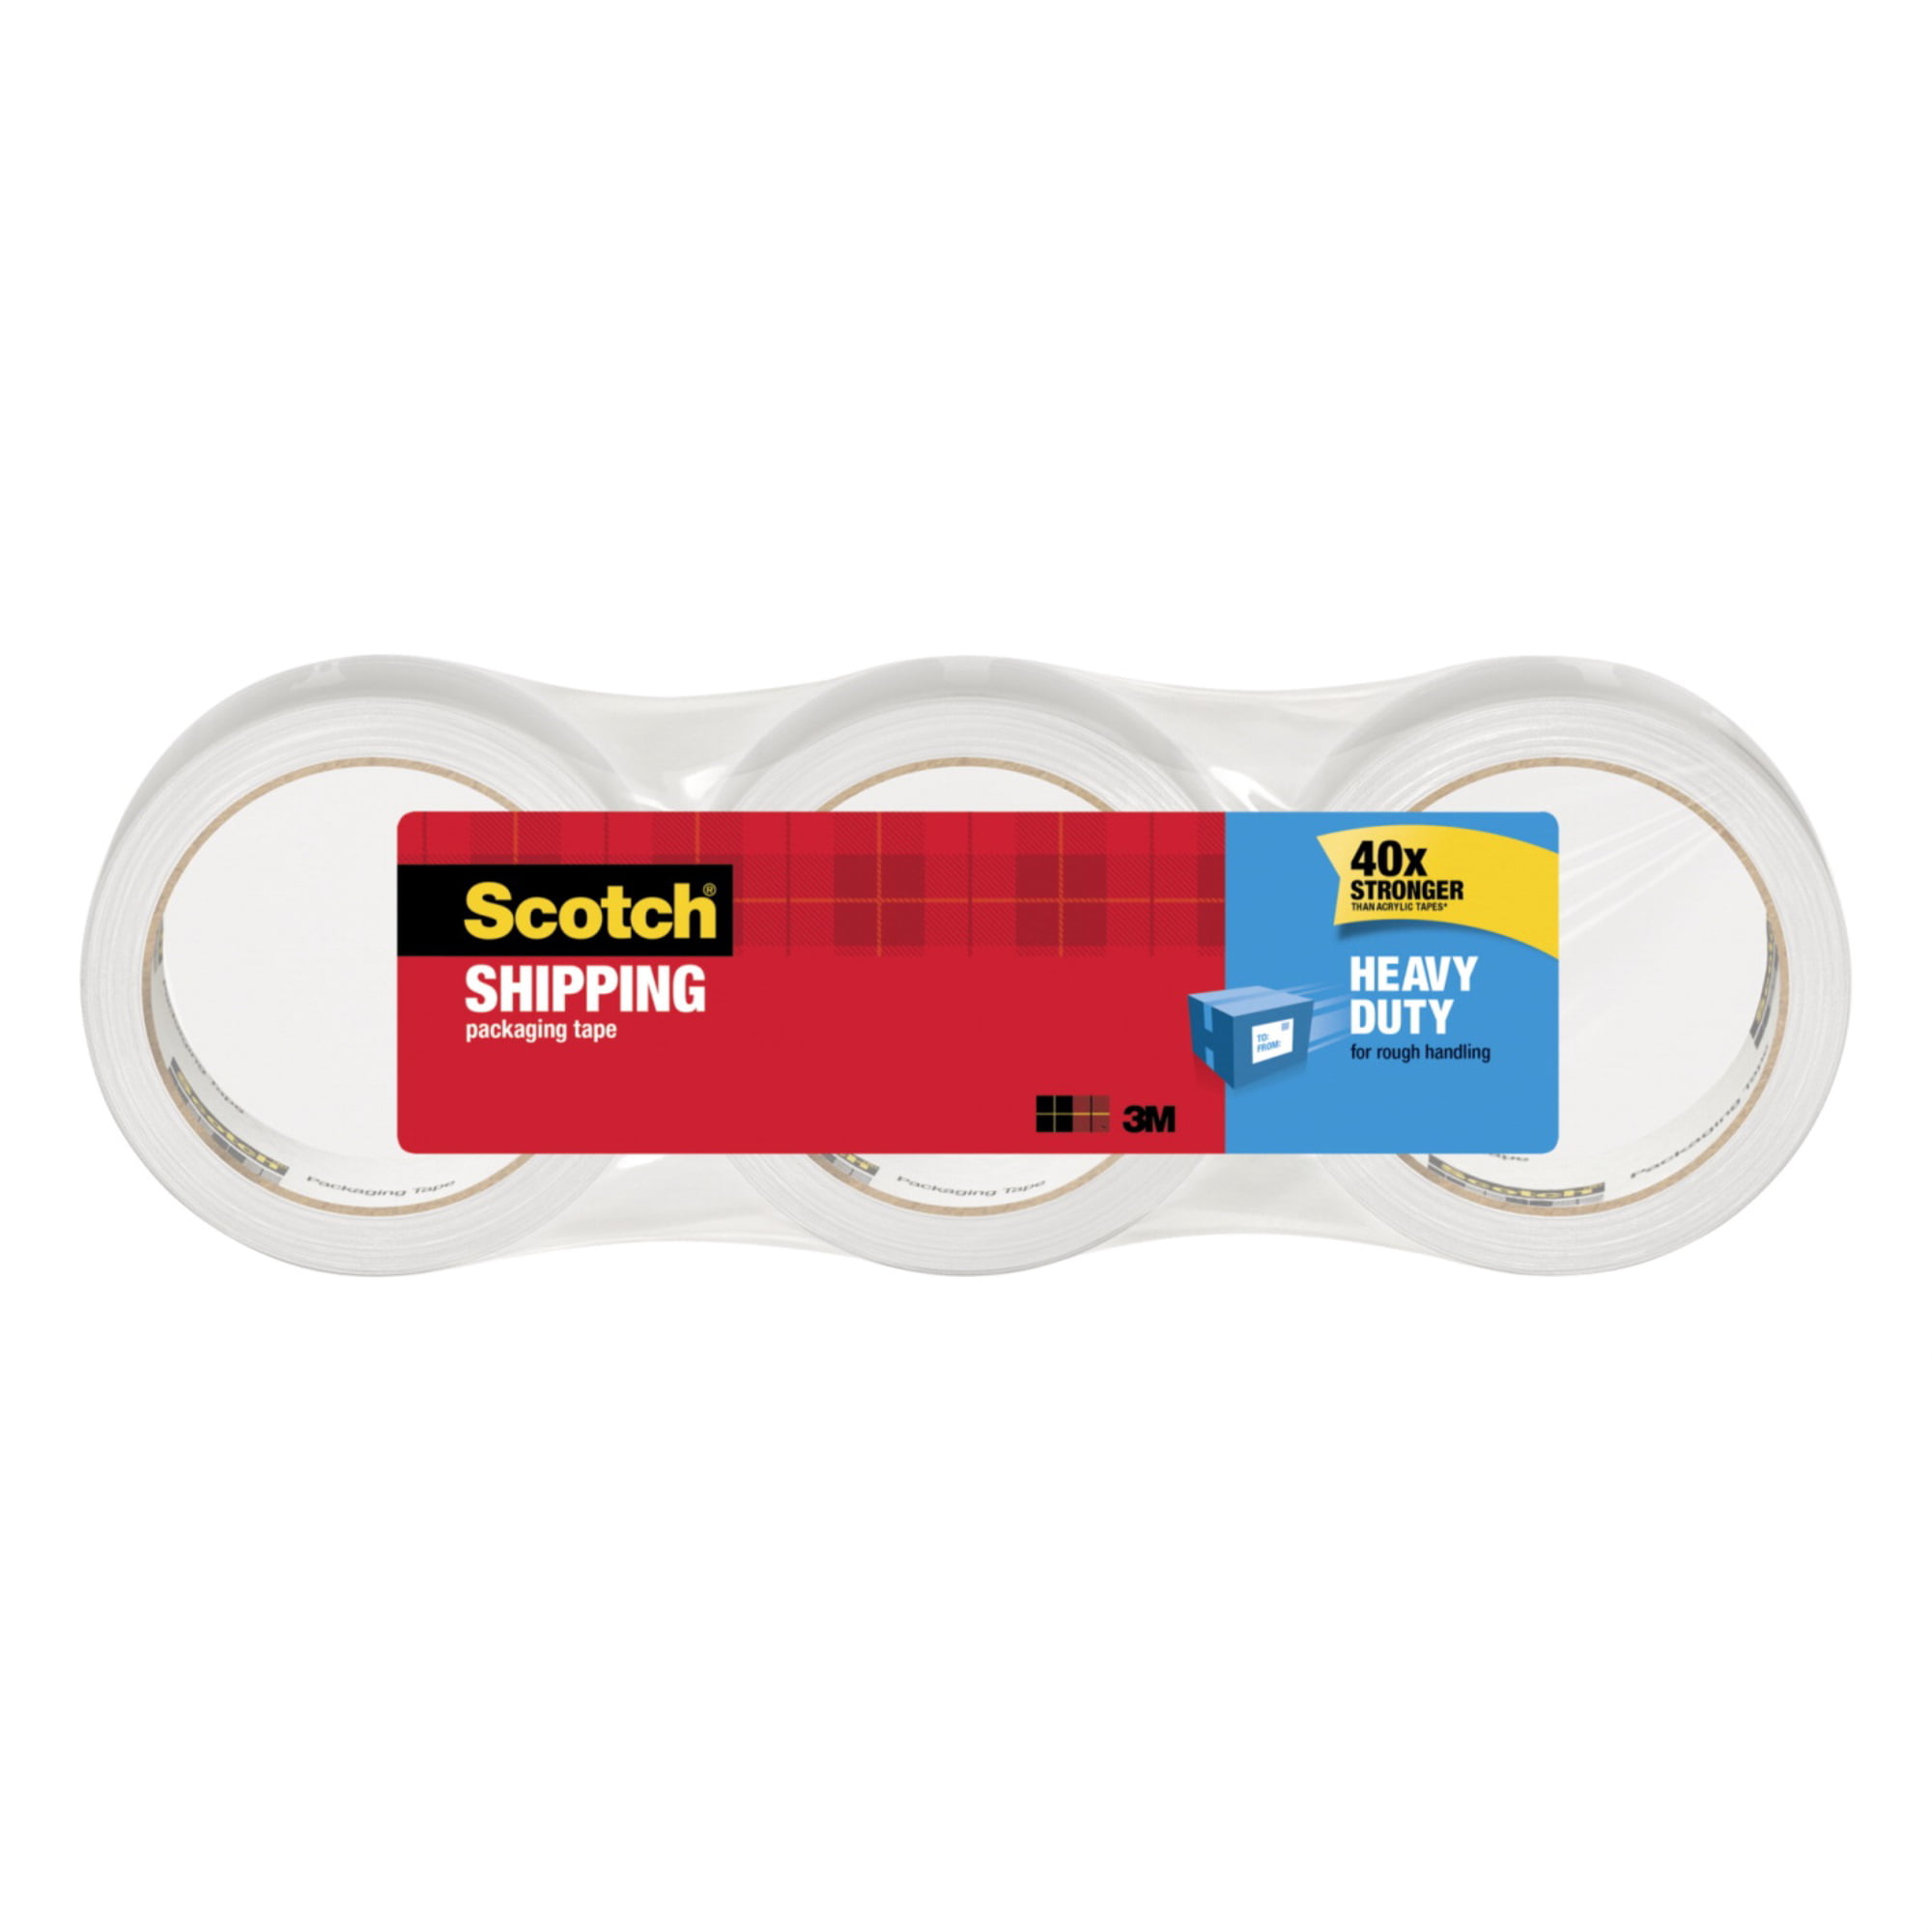 Scotch Box Lock Packaging Tape 6 Rolls with Dispenser 1.88 in x 800 in Extrem...